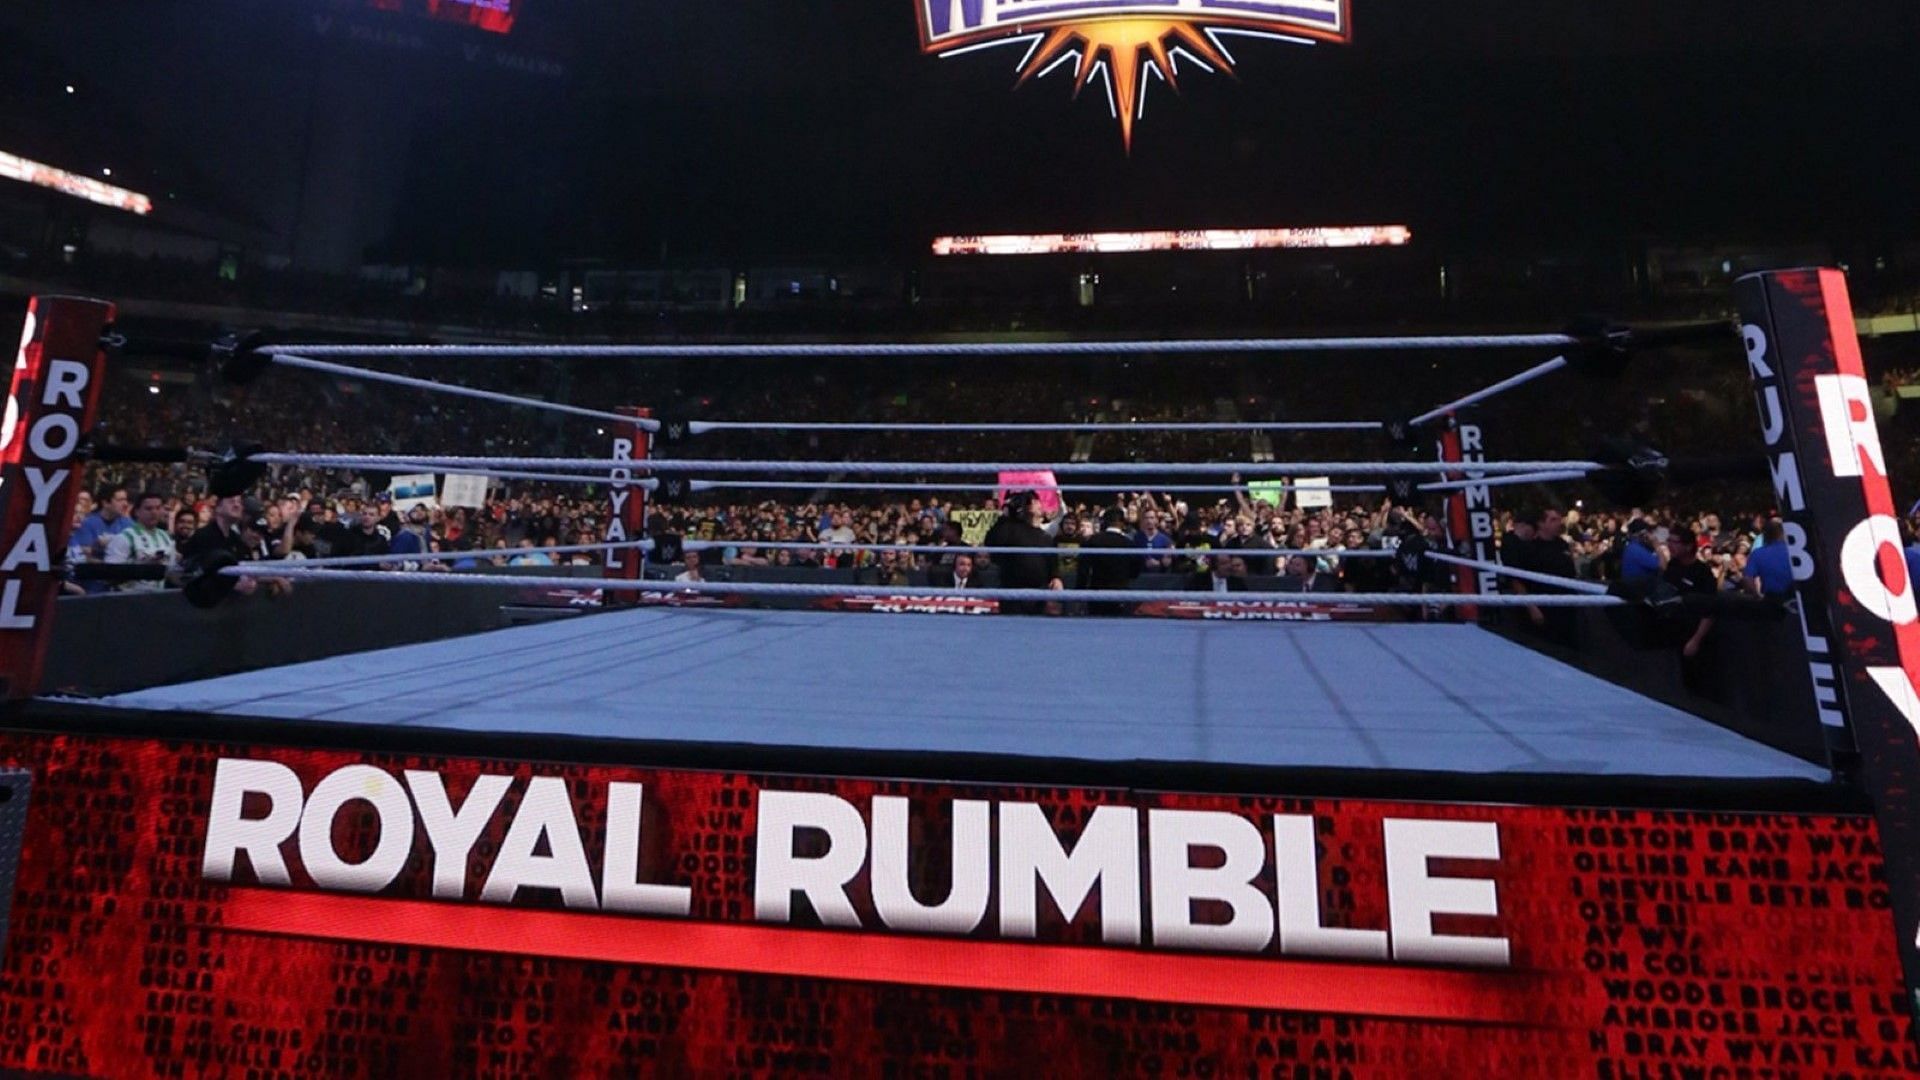 The ring setup for the annual WWE Royal Rumble event